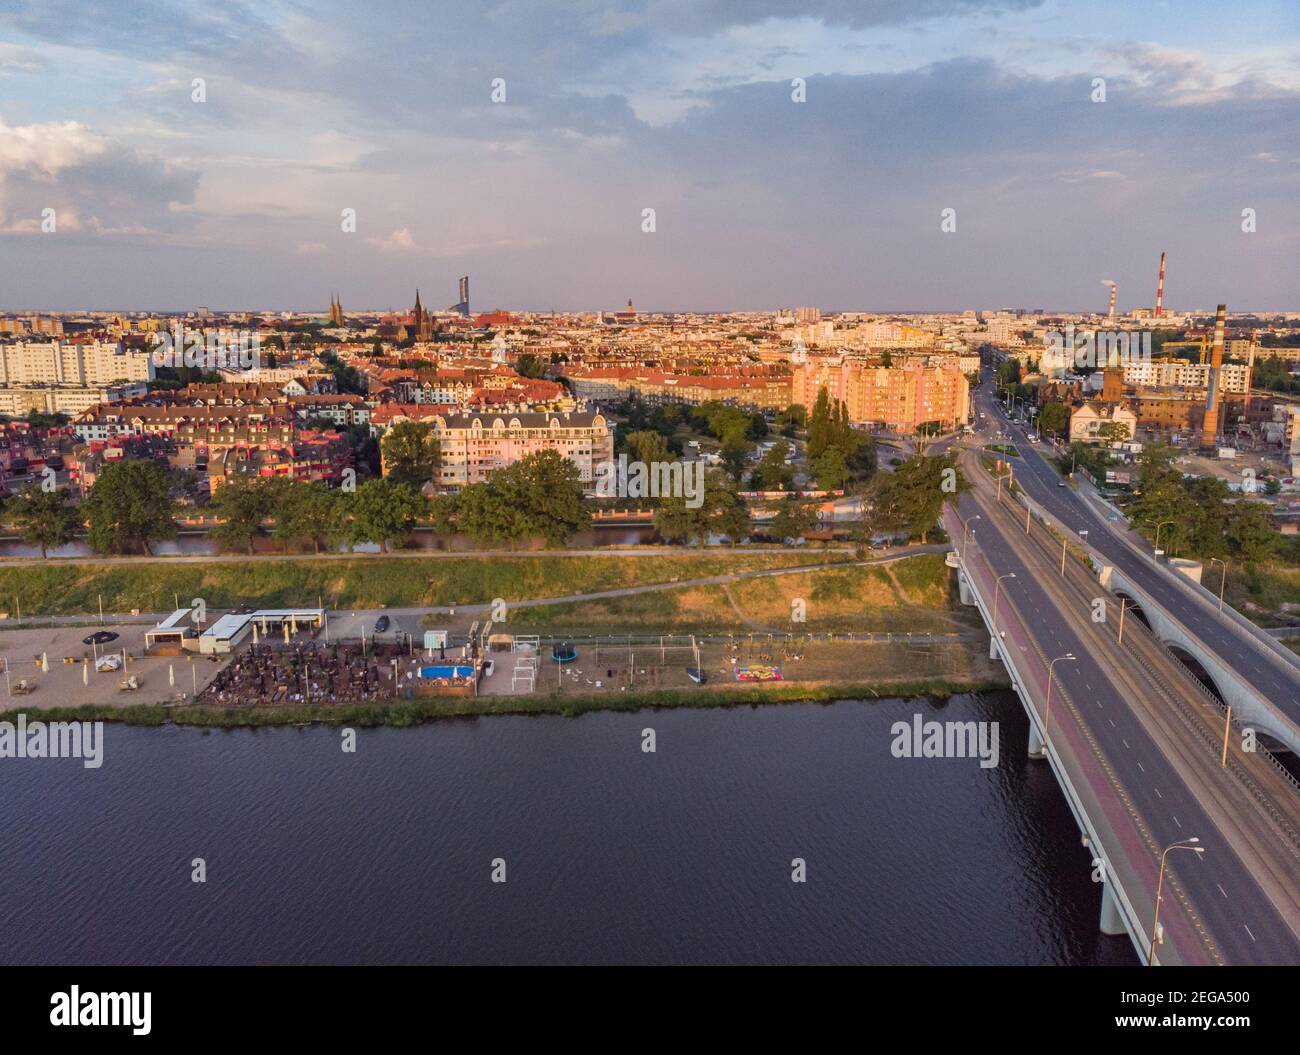 Wroclaw June 21 2019 Warsaw bridges over Odra river at sunny morning Stock Photo